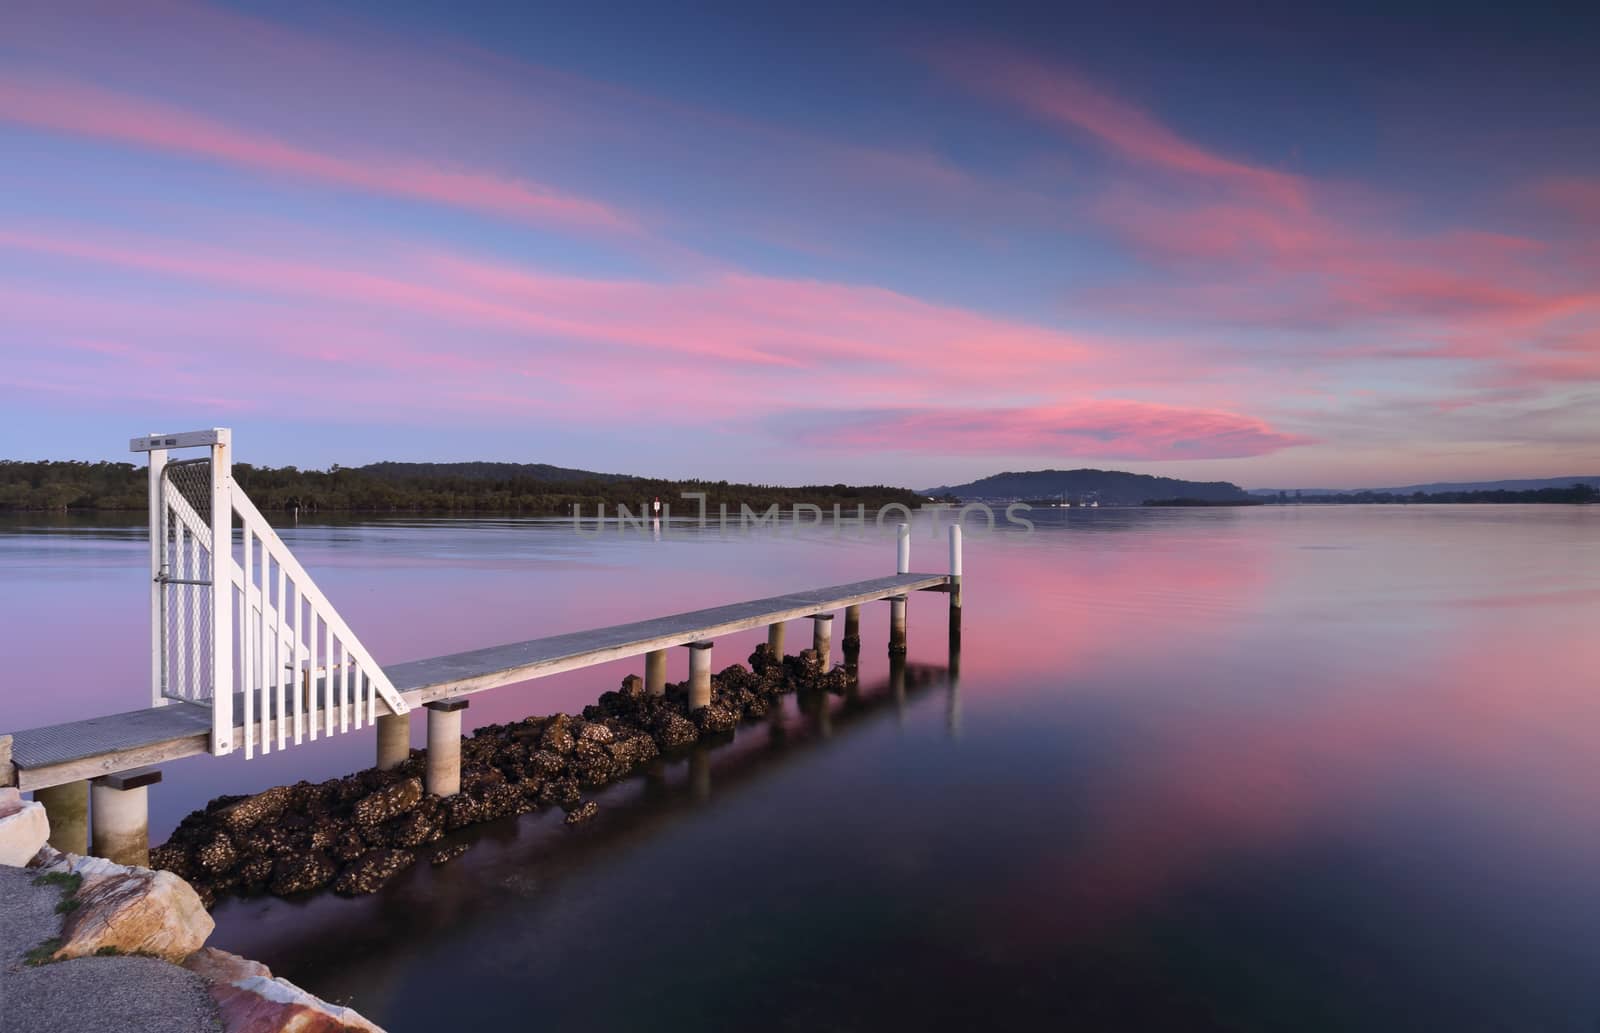 Saratoga jetty at sunset with soft light and  pink and blue hues.  Perfect place to relax or fish.